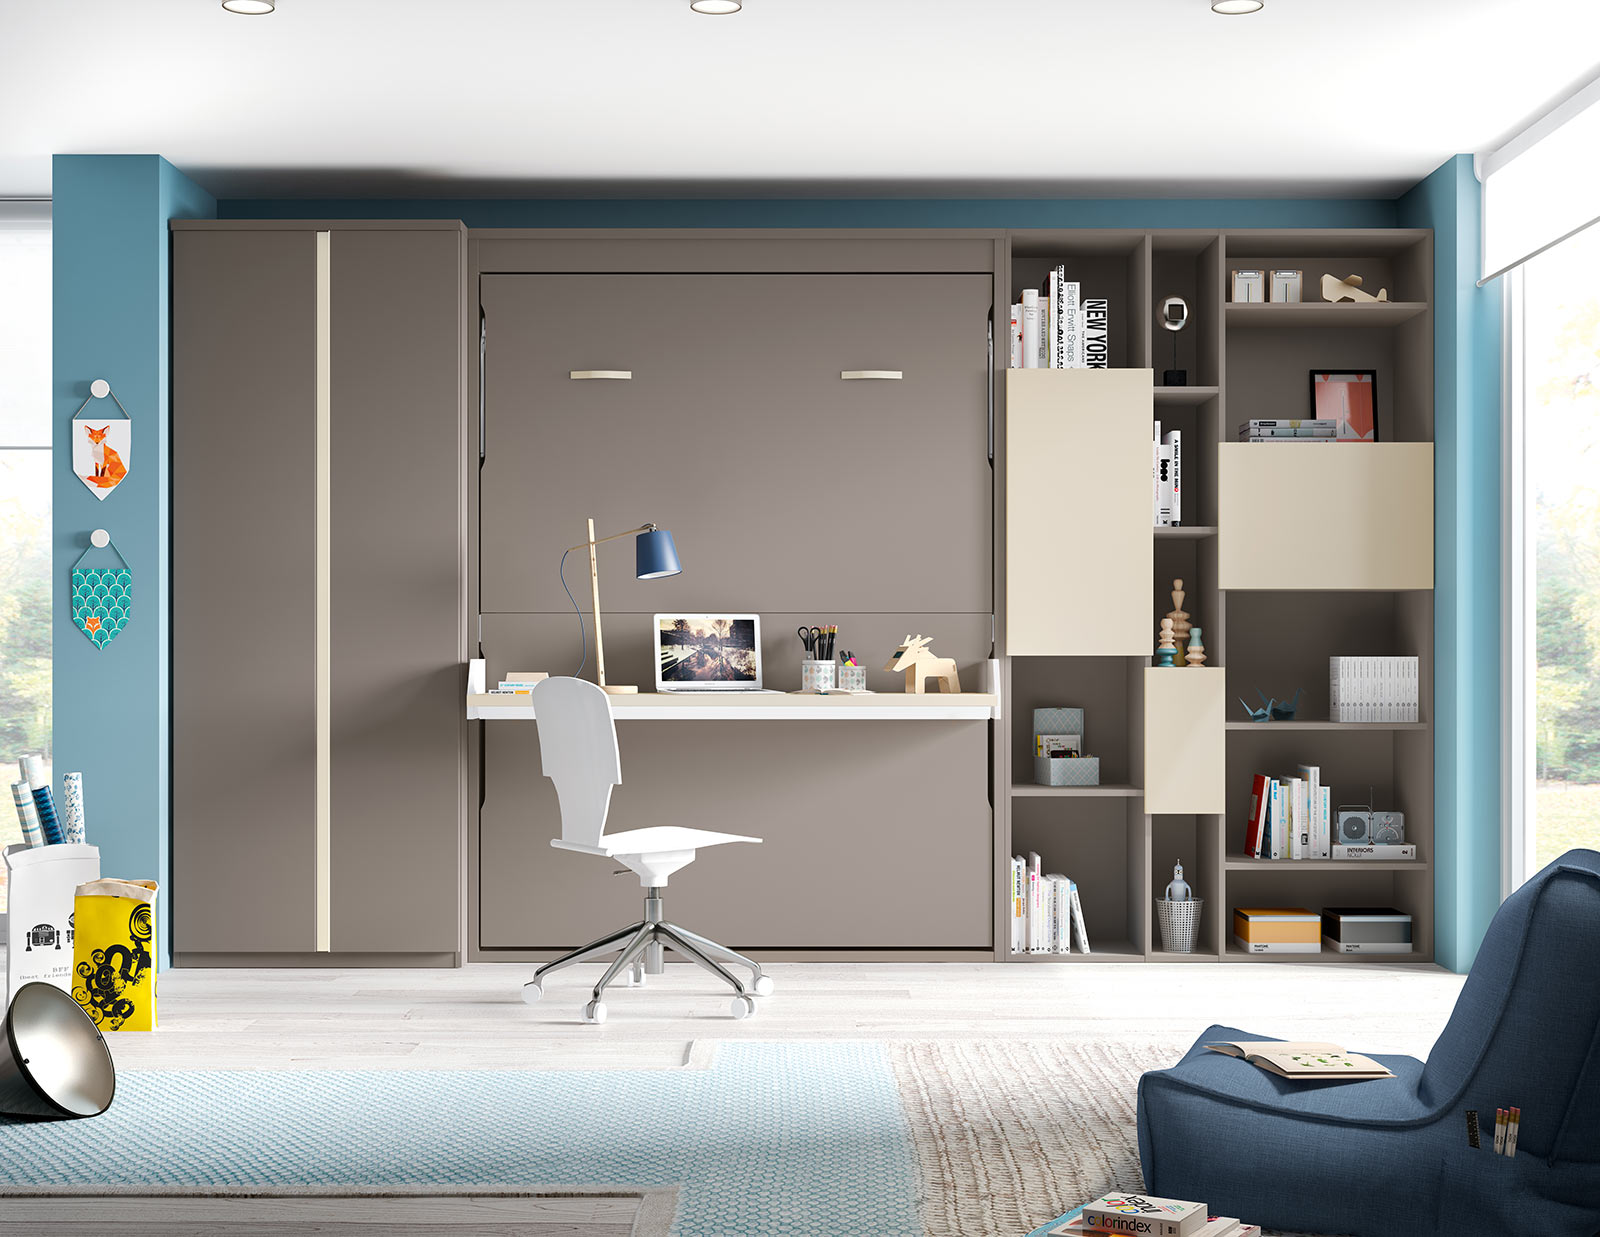 Space Deskbed The London Wallbed Company, Single Murphy Bed With Desk Uk